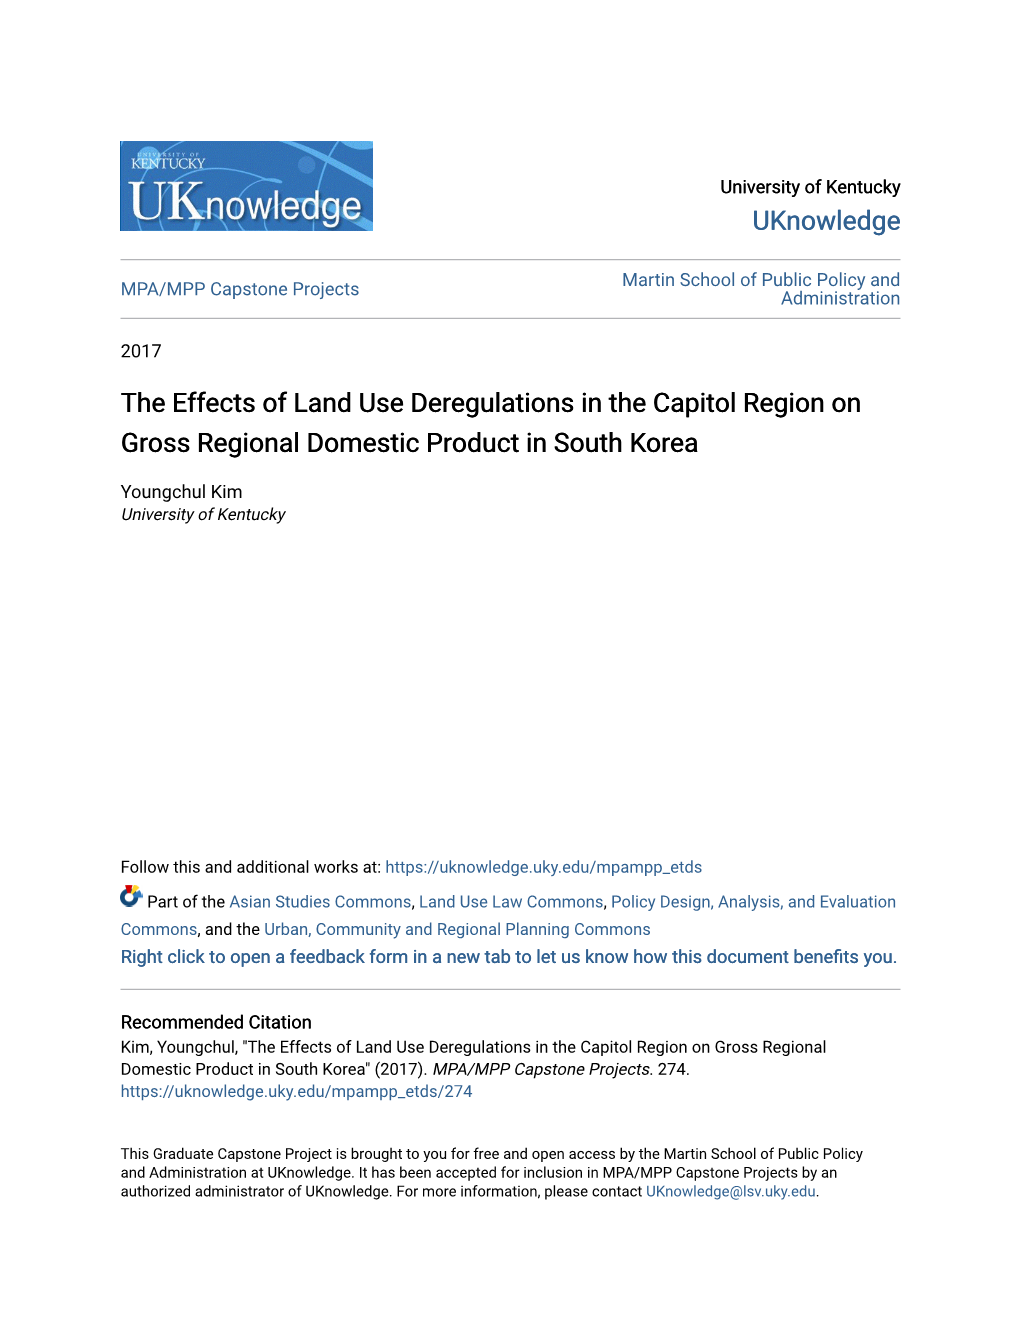 The Effects of Land Use Deregulations in the Capitol Region on Gross Regional Domestic Product in South Korea